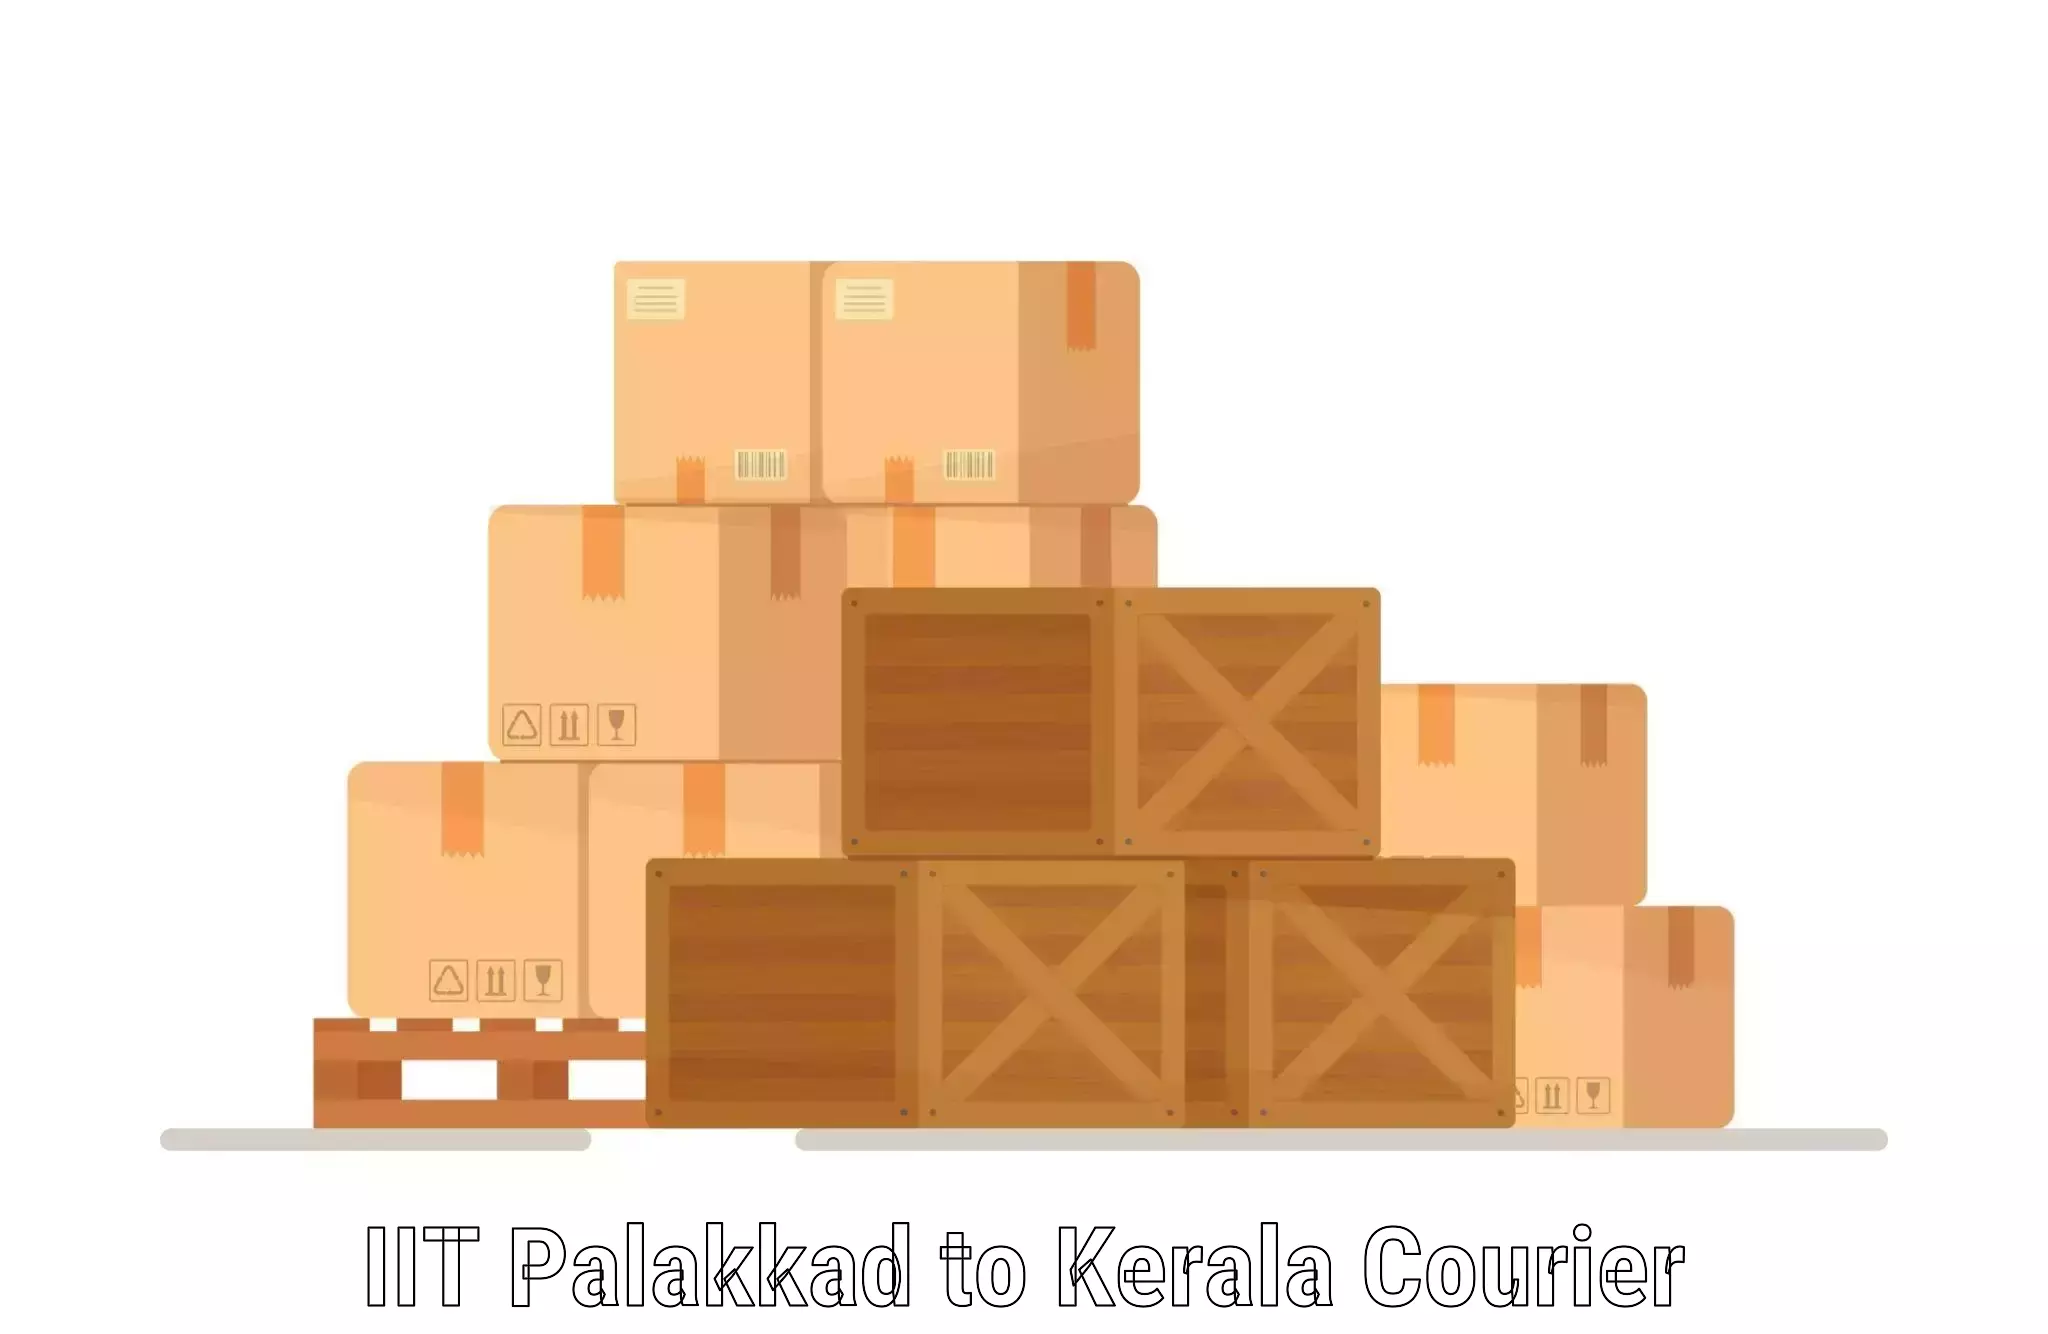 Express delivery capabilities in IIT Palakkad to Cochin Port Kochi